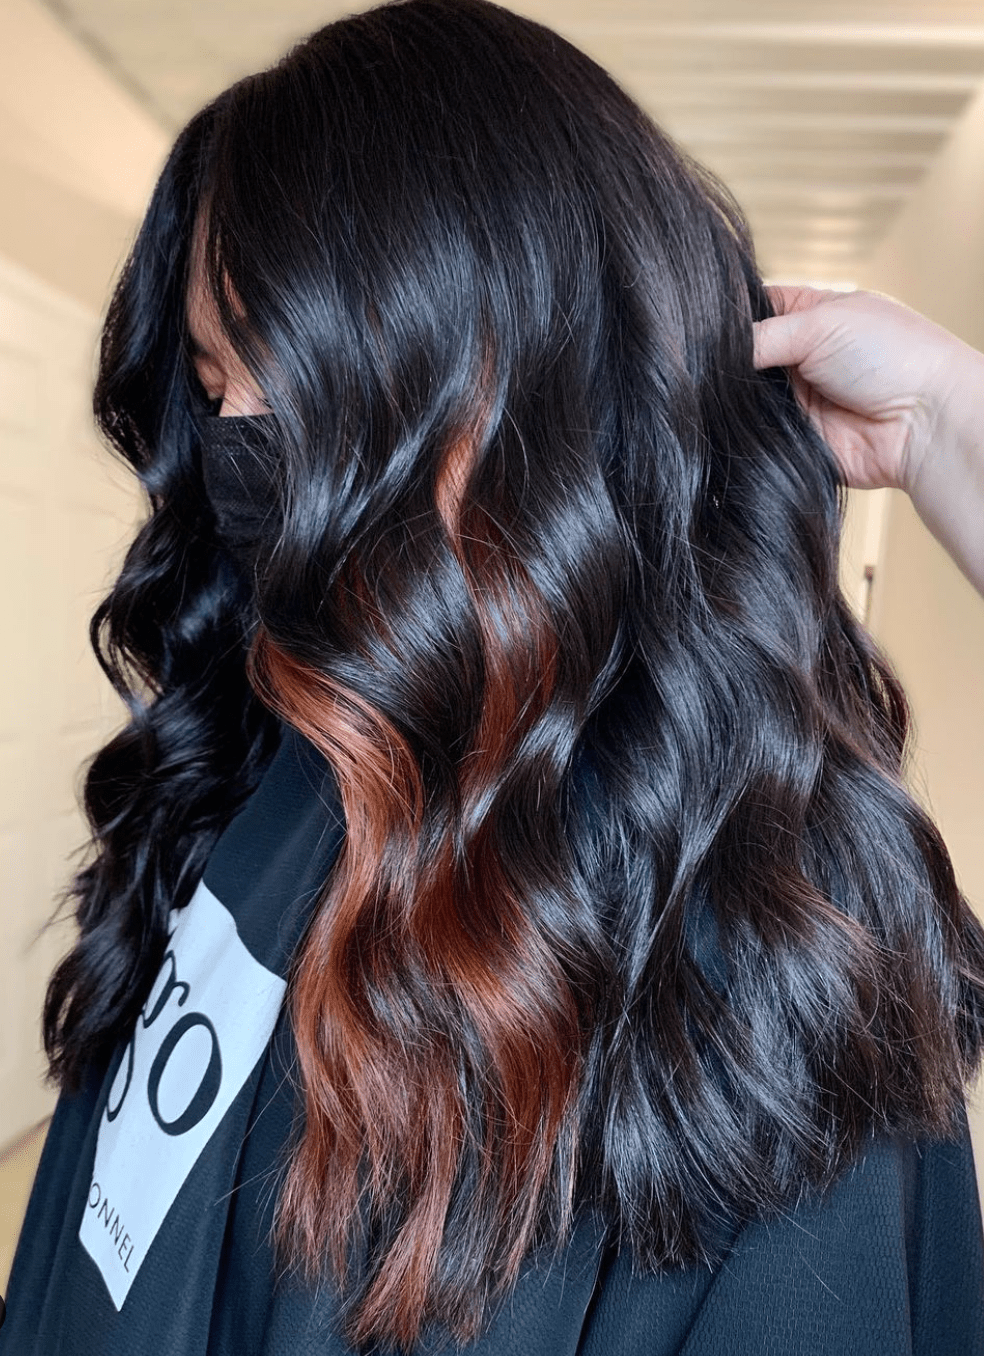 Top 10 Hair Trends Searched on Google 2021